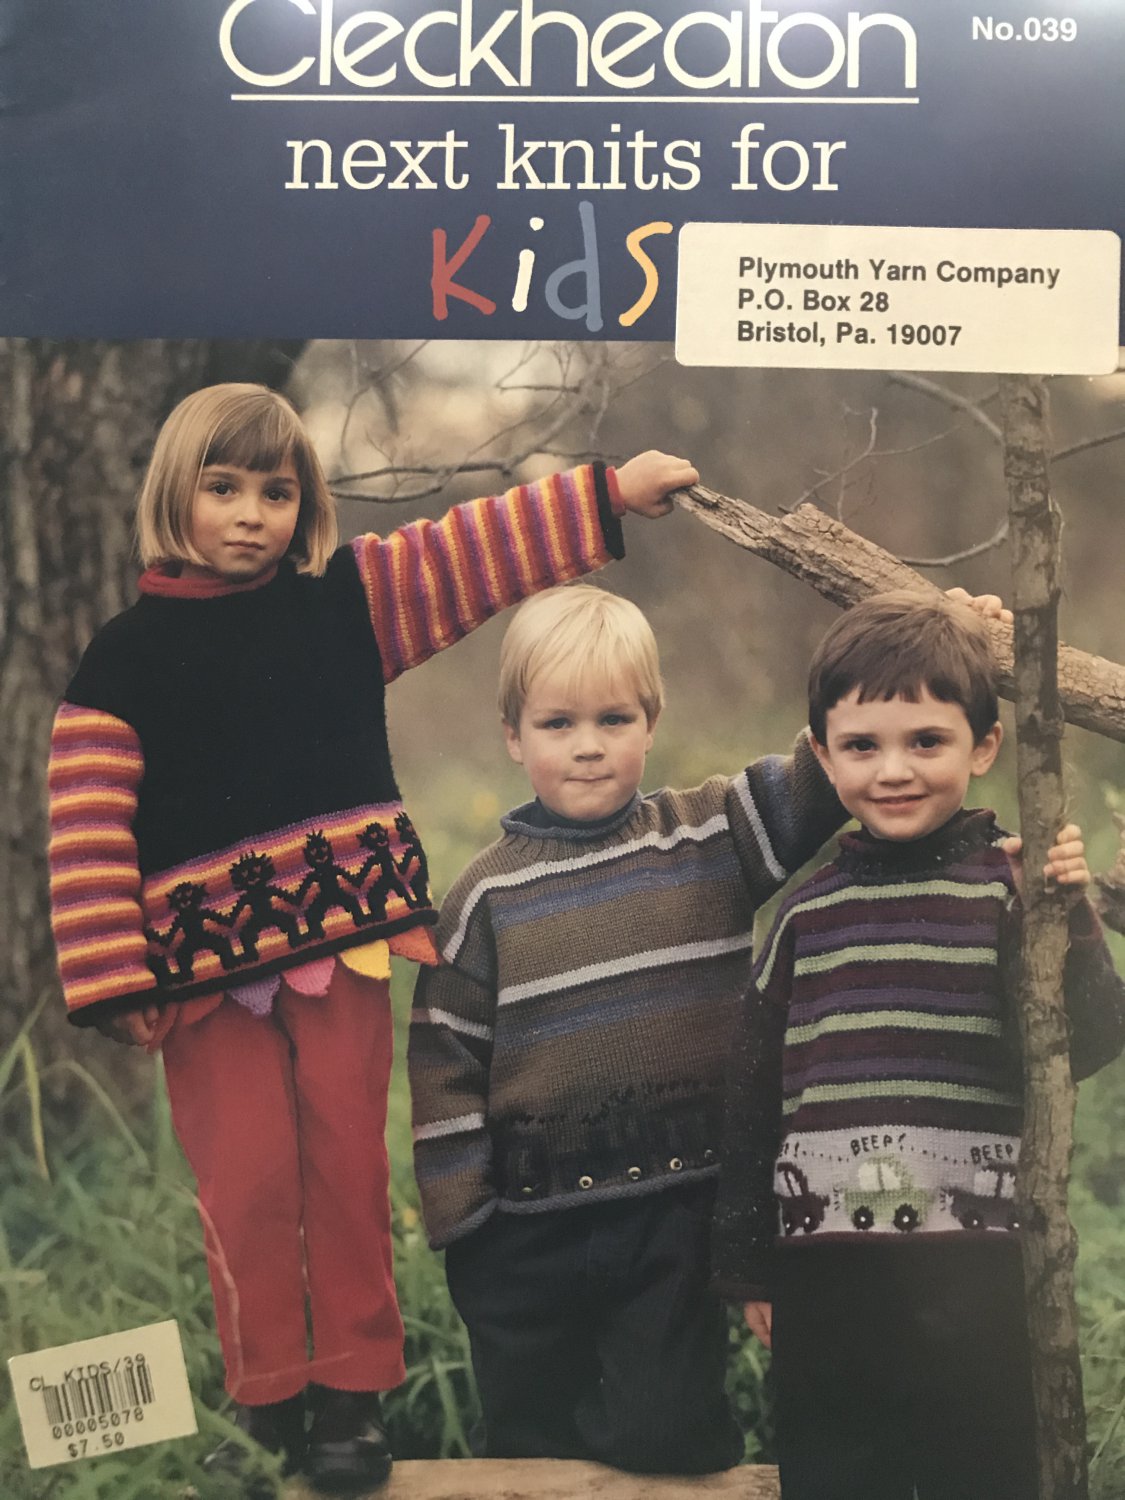 Checkheaton Next Knits for Kids Knitting Patterns 9 handknits in 8 ply sizes 2 - 8 years #039